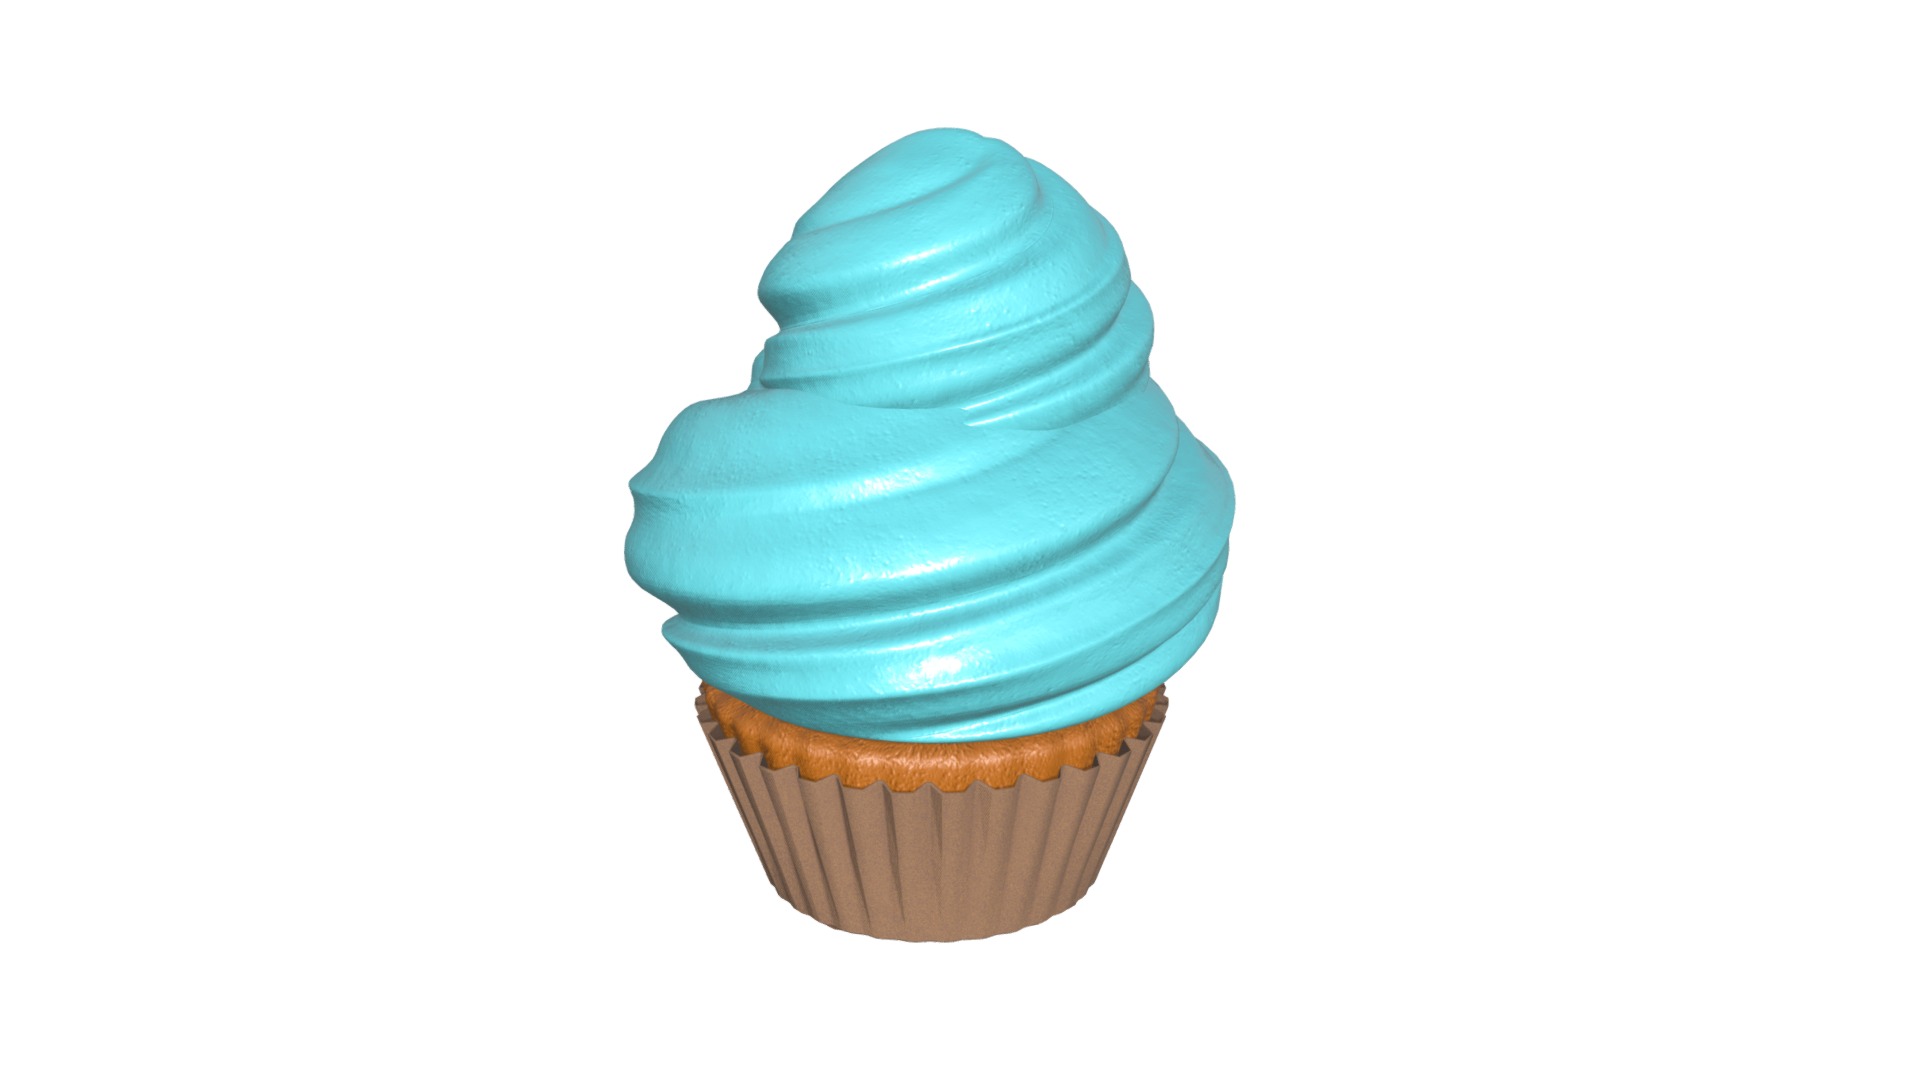 3D model Сupcake blue - This is a 3D model of the Сupcake blue. The 3D model is about a cupcake with a blue top.